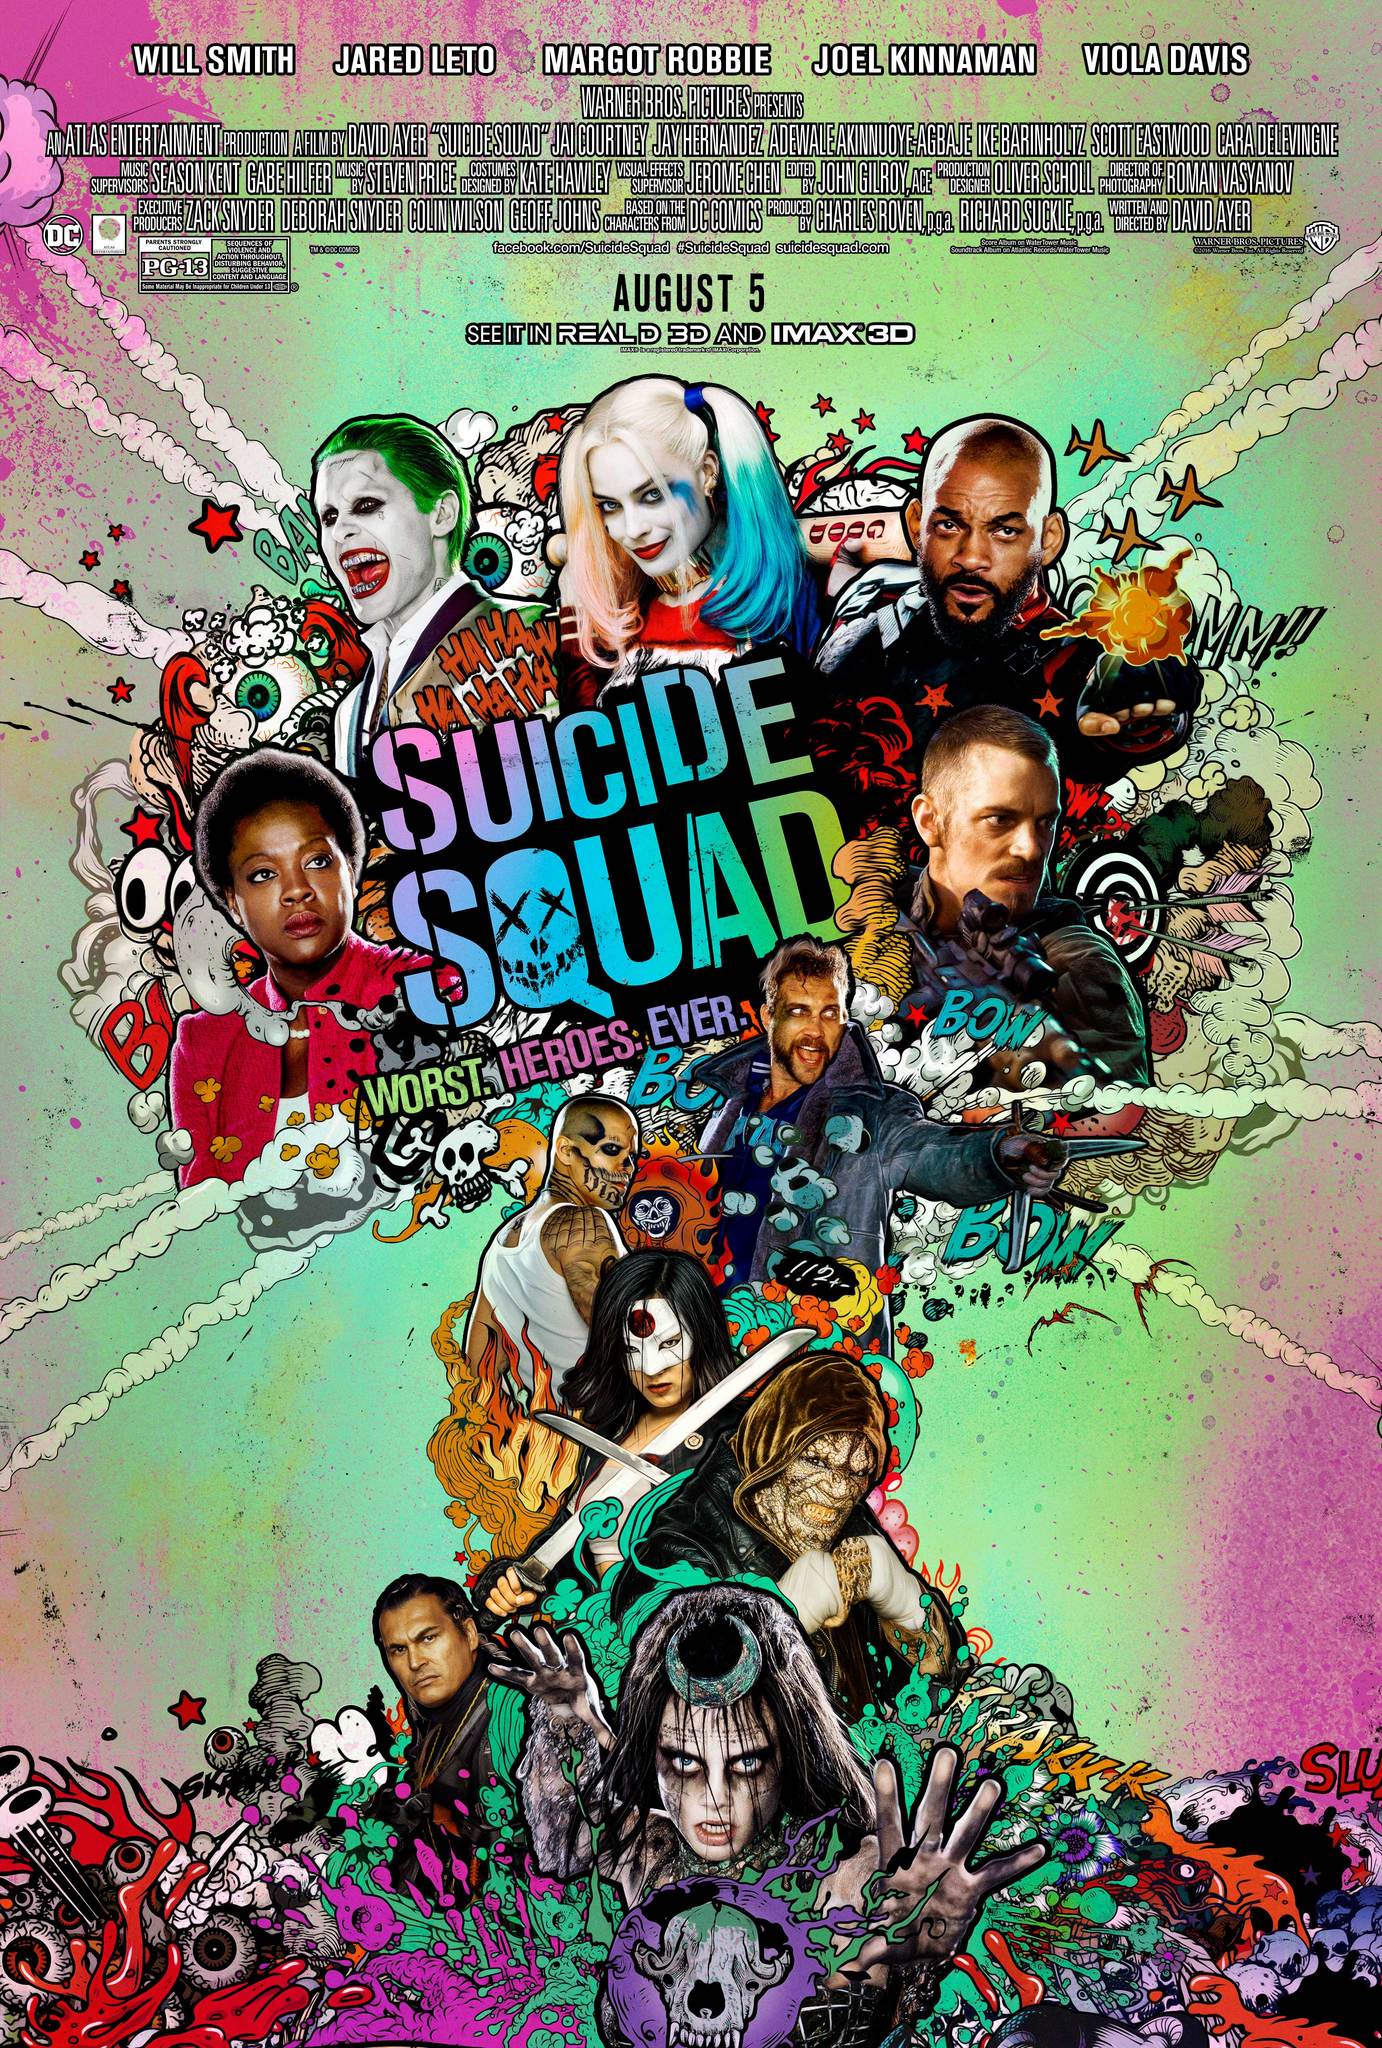 suicide squad poster - Will Smith Jared Leto !!11!!L Margot Robbie Joel Kinnaman Viola Davis Low Miny Ummai August 5 Stybesar Imax Cees Suicide Squad Worst Heroes Ever